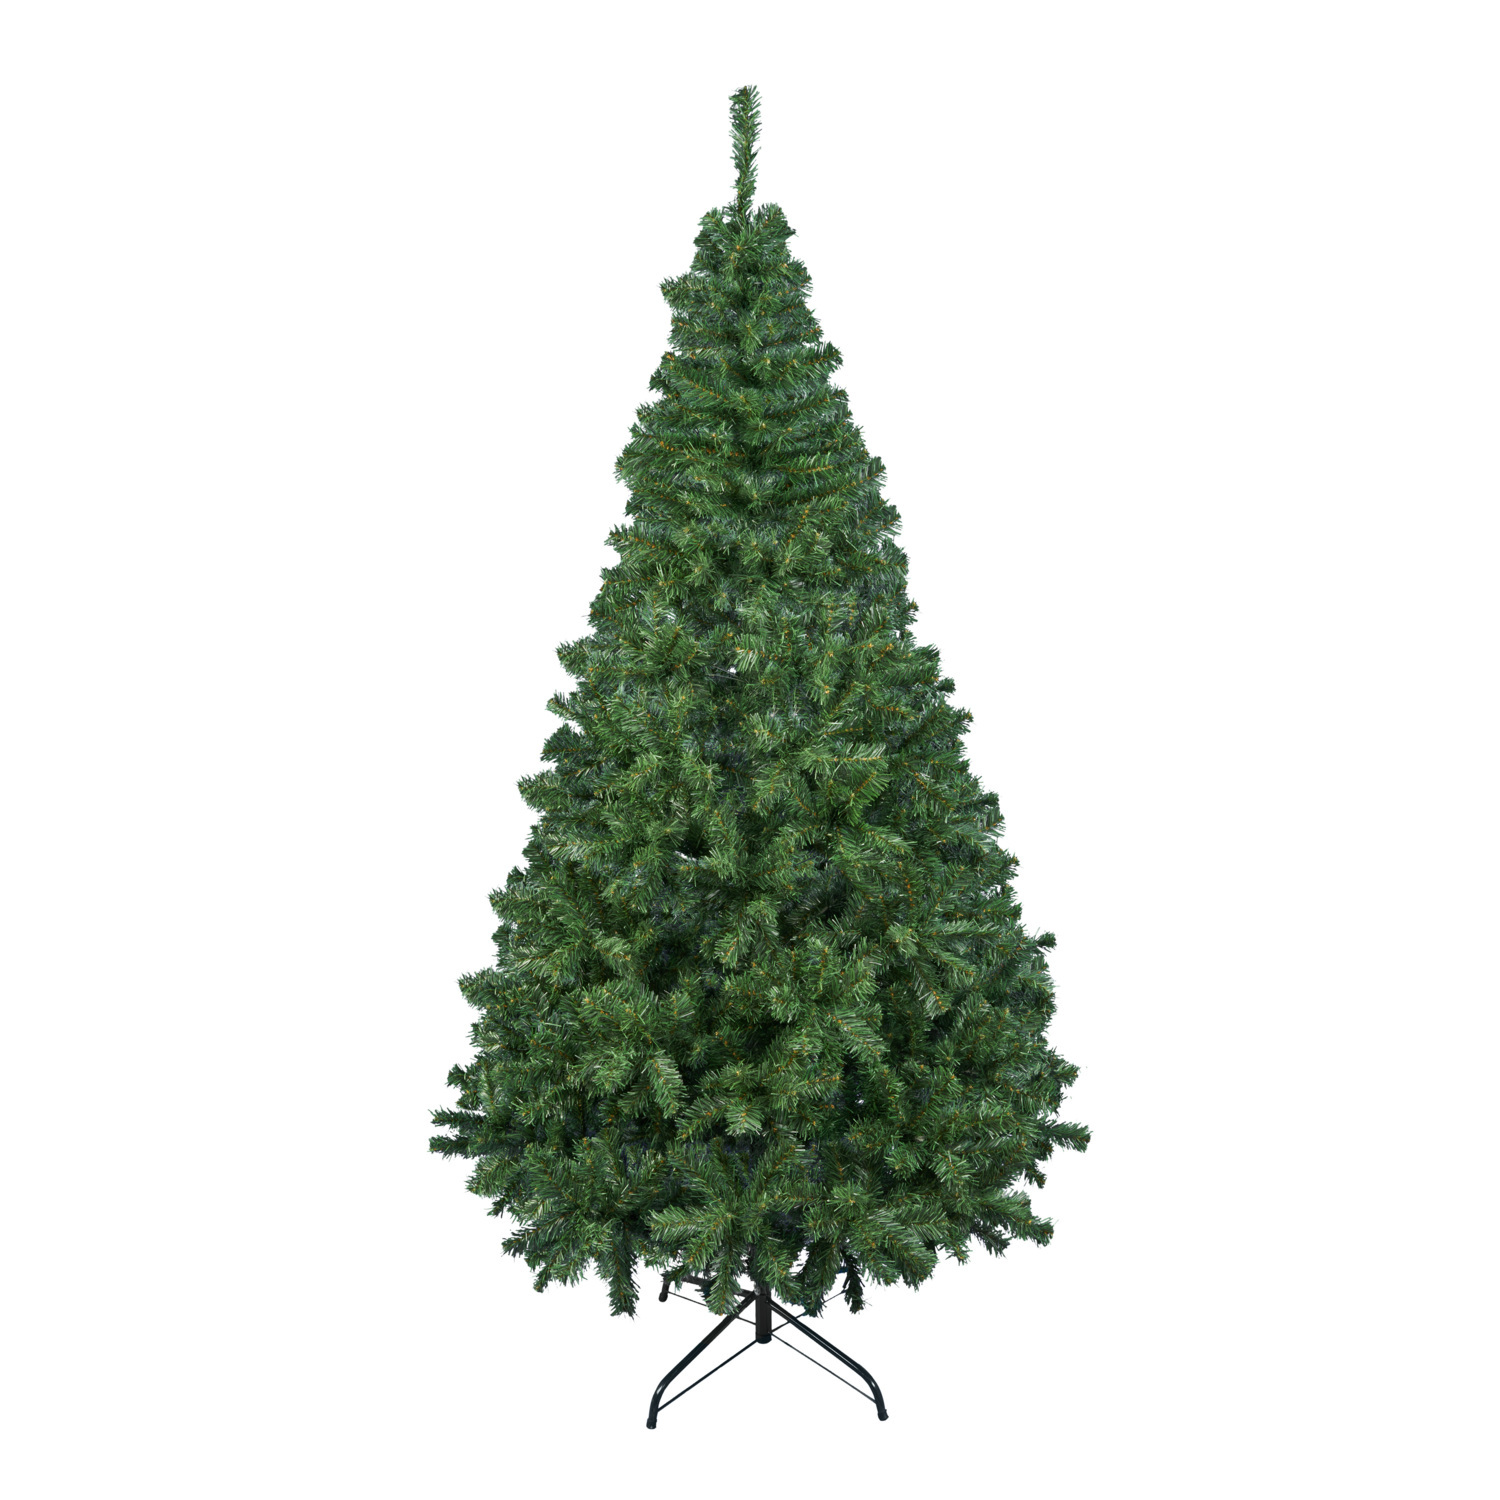 Norway Spruce Artifical Christmas Tree 4ft Image 1